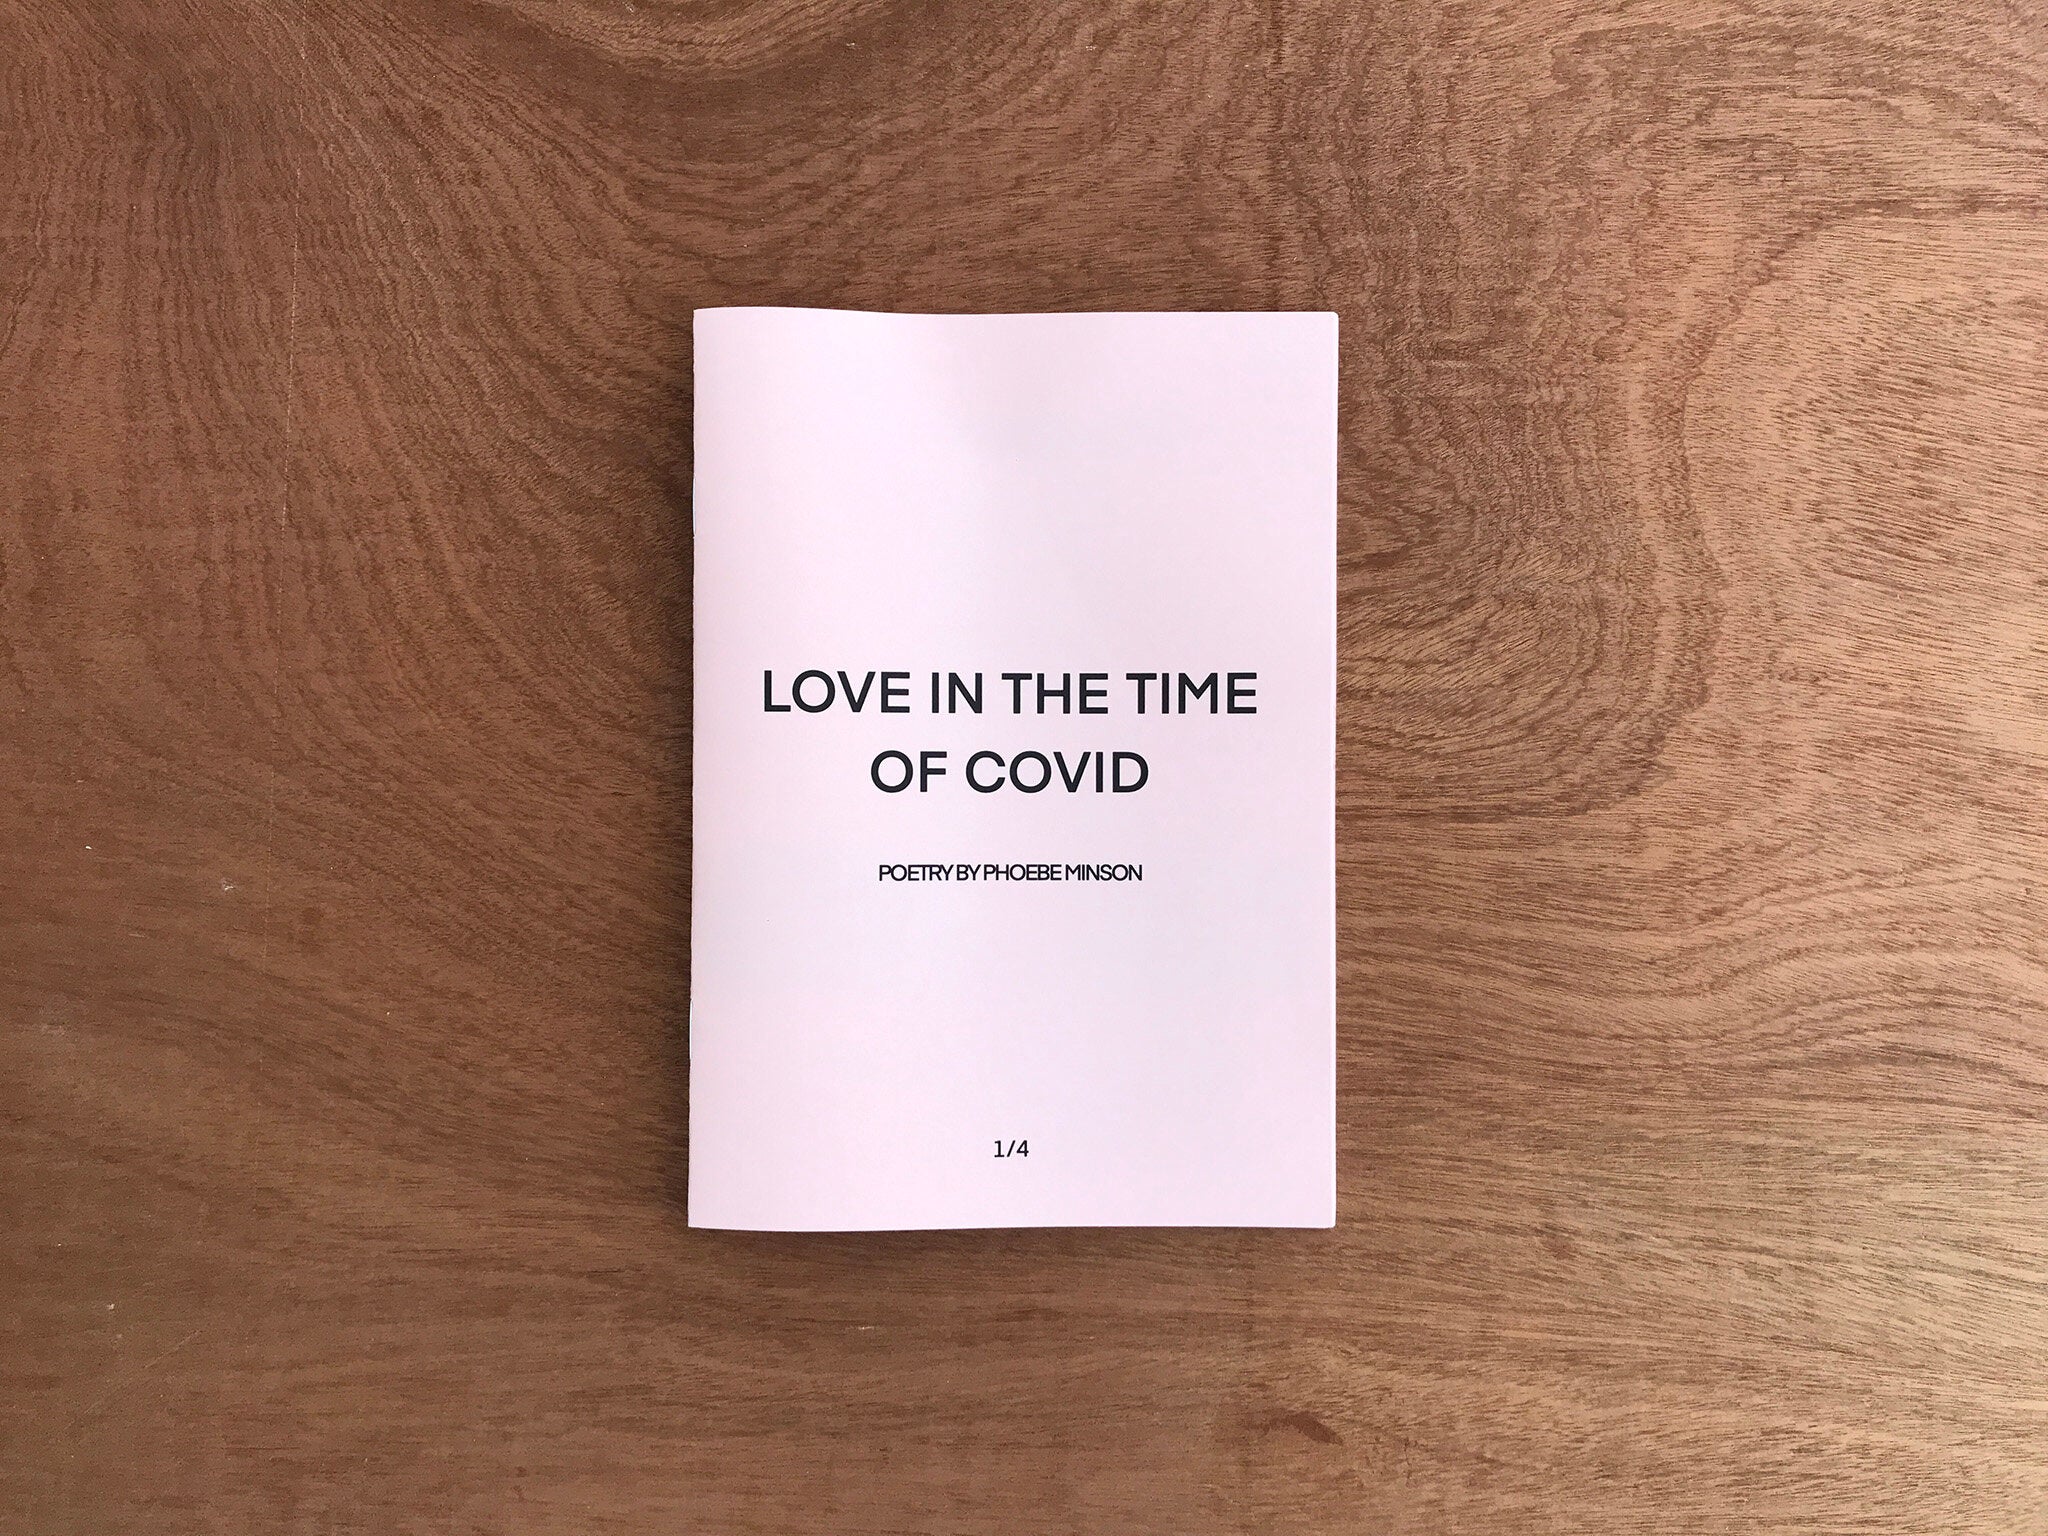 LOVE IN THE TIME OF COVID by Phoebe Minson